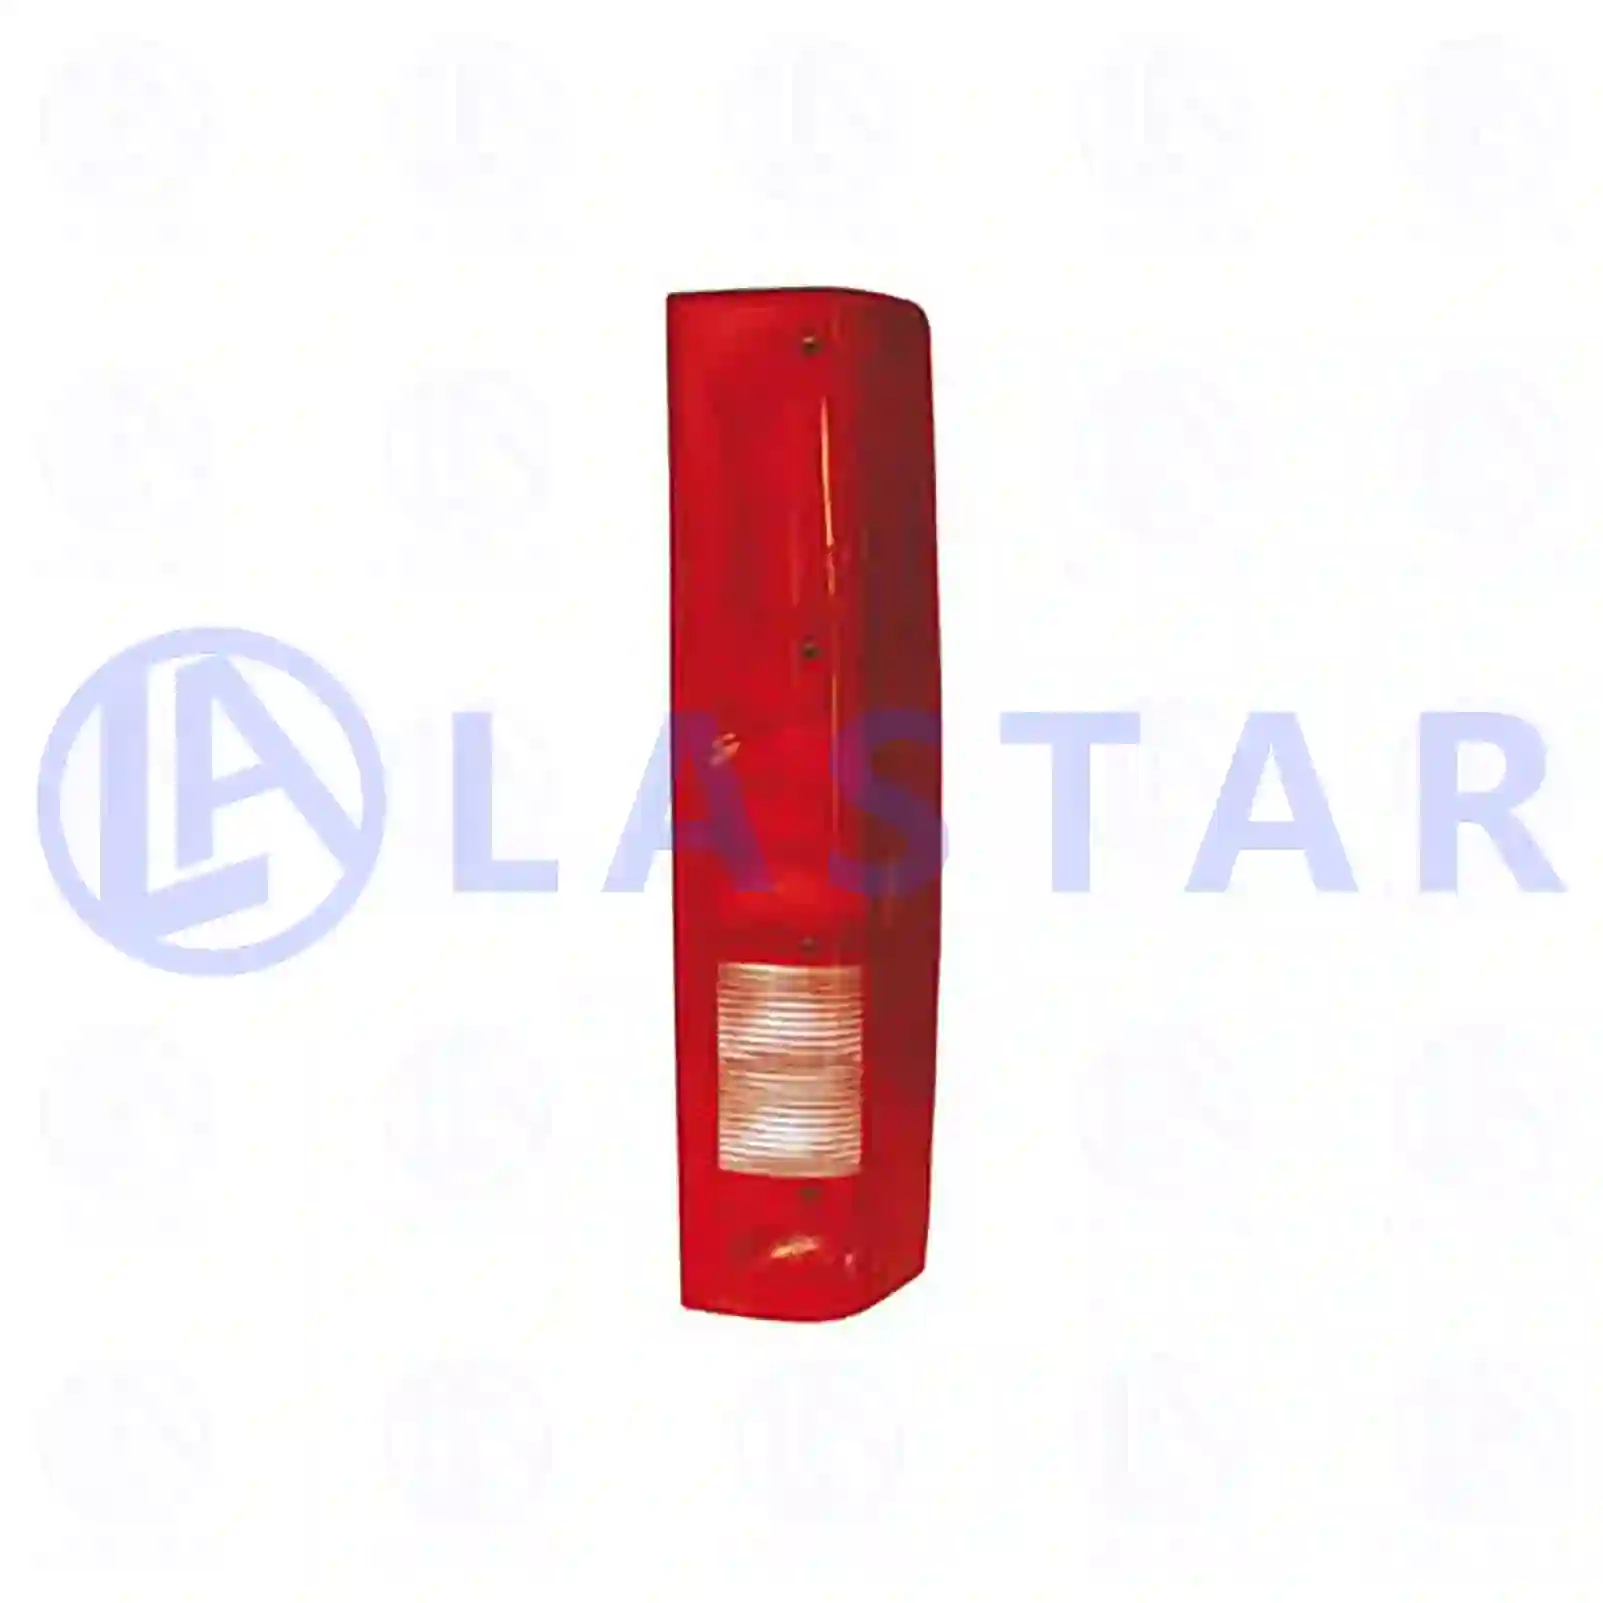 Tail lamp, right, 77713039, 866761, 500319555, 500319558 ||  77713039 Lastar Spare Part | Truck Spare Parts, Auotomotive Spare Parts Tail lamp, right, 77713039, 866761, 500319555, 500319558 ||  77713039 Lastar Spare Part | Truck Spare Parts, Auotomotive Spare Parts